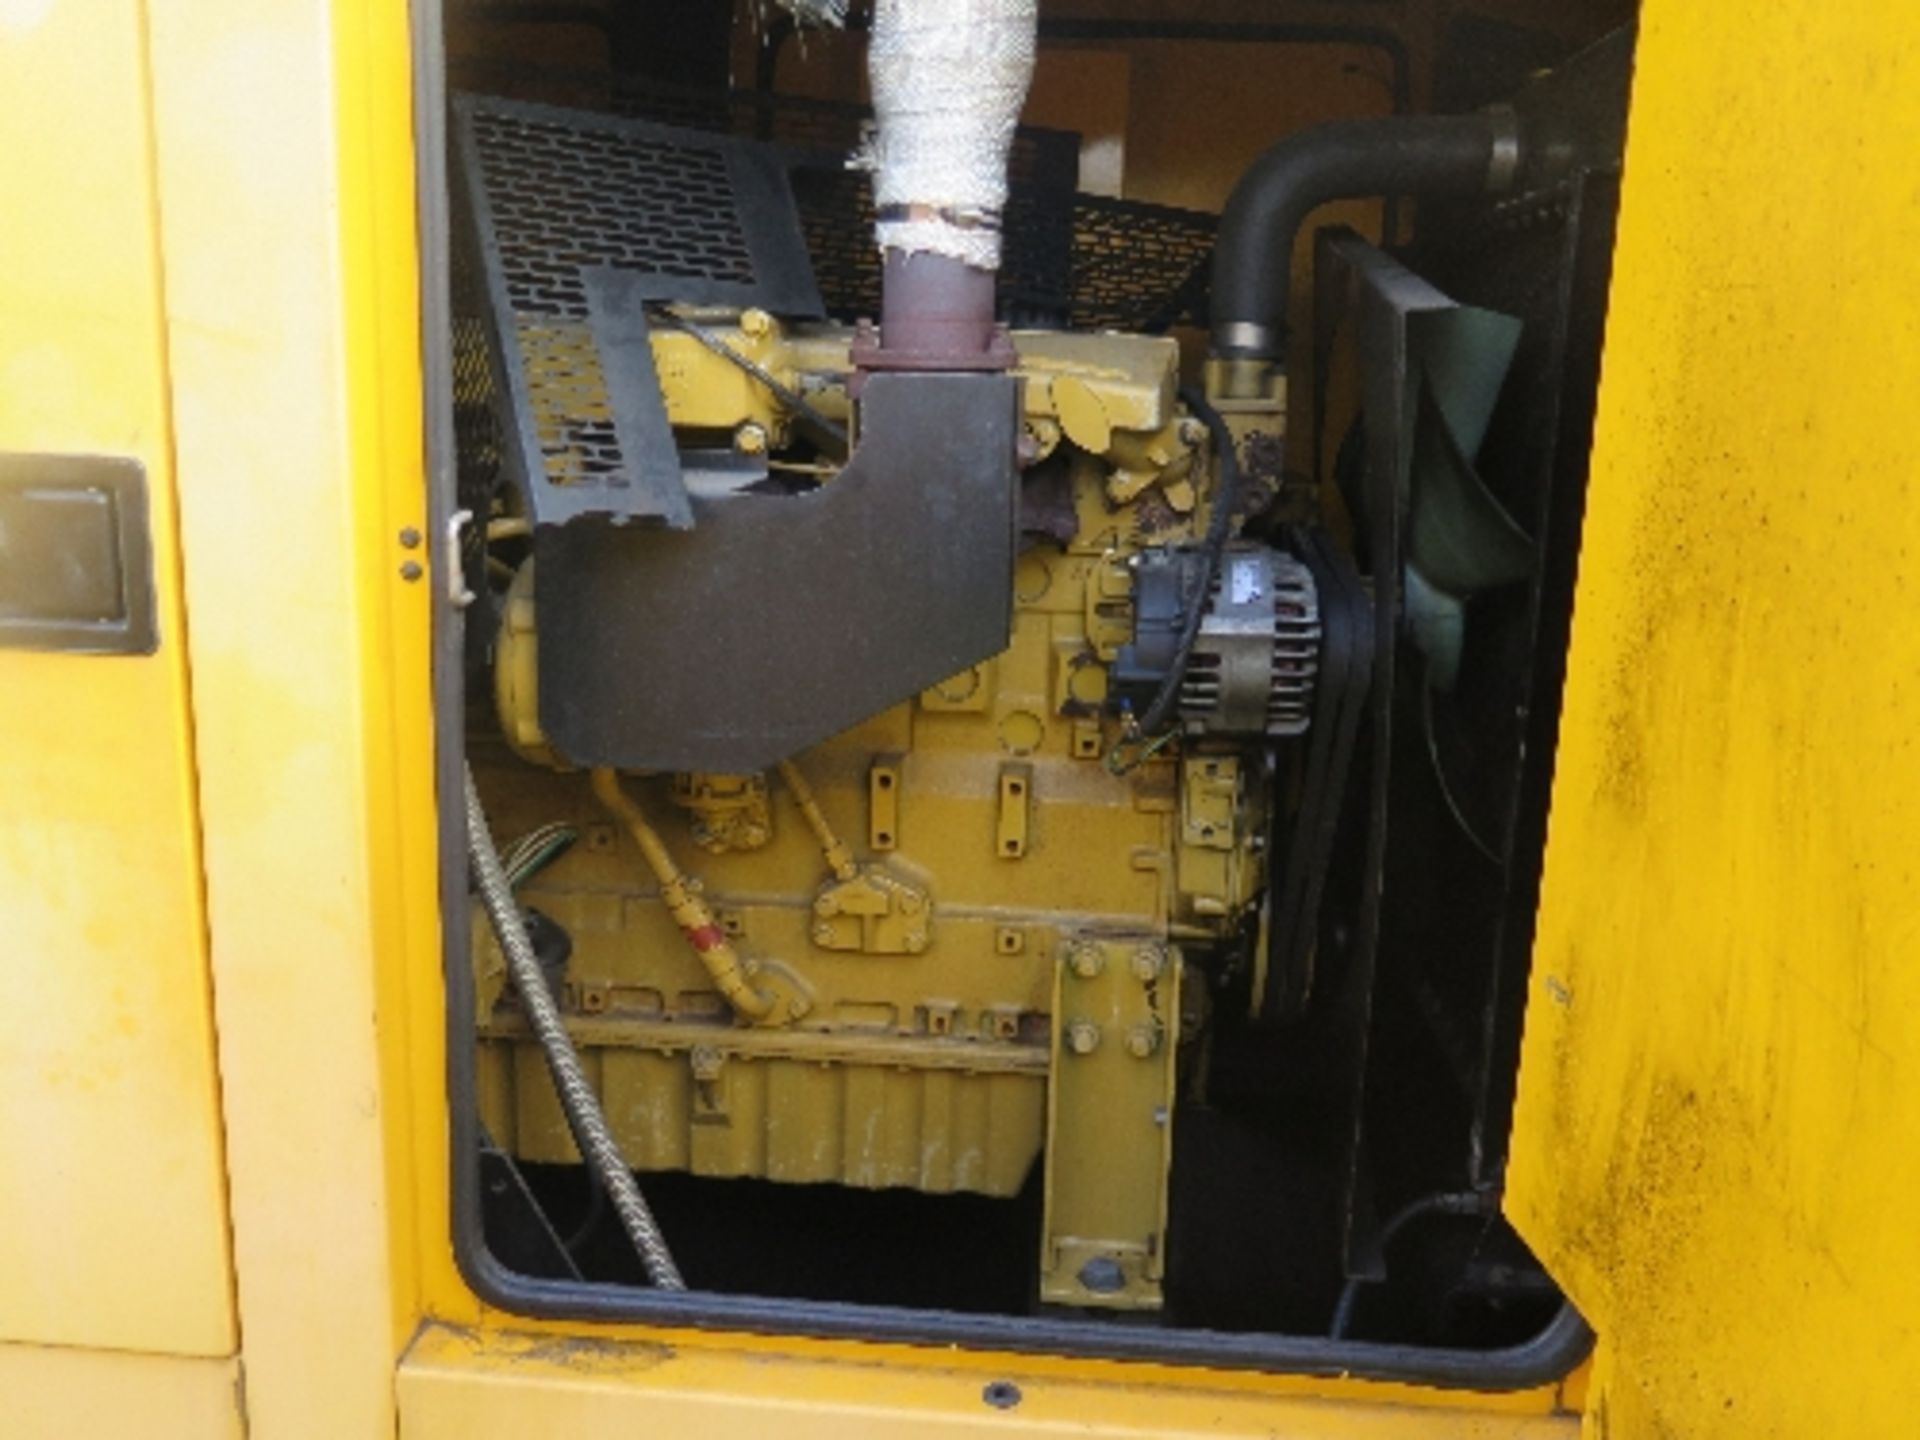 Caterpillar XQE100 trailer mounted generator 15455 hrs 145916
PERKINS - RUNS AND MAKES POWER
FAN - Image 7 of 8